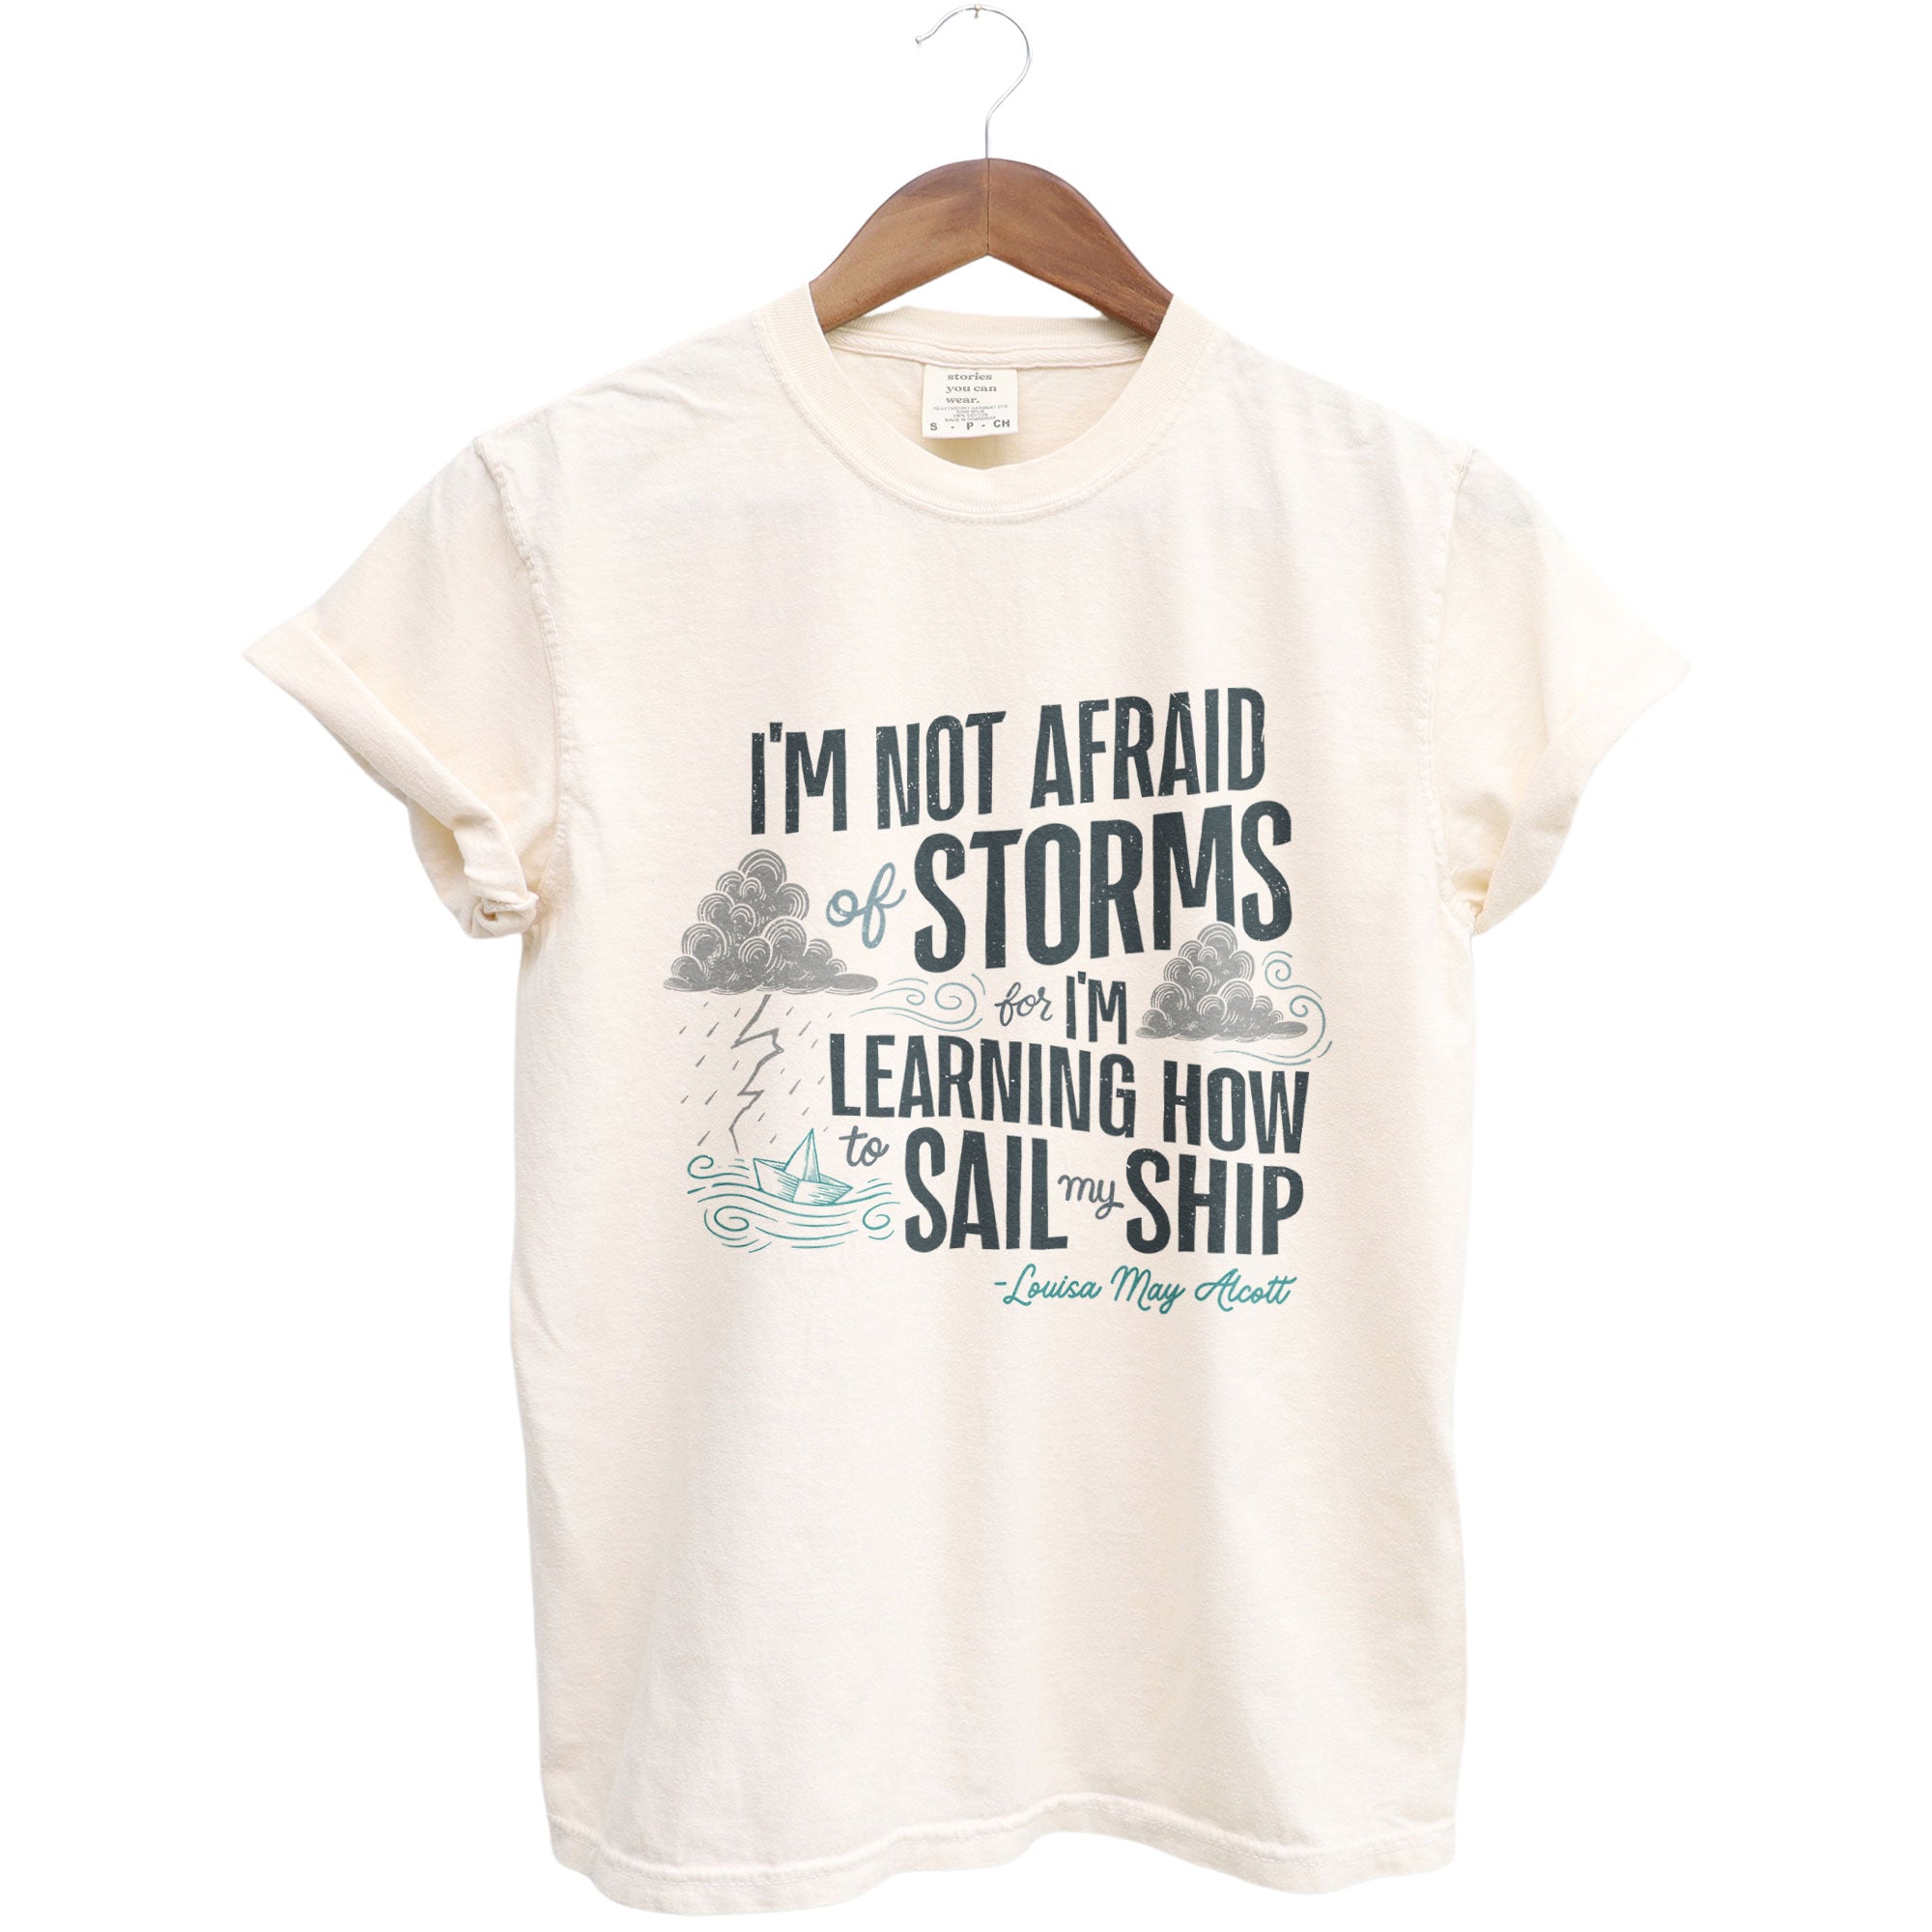 Im Not Afraid of Storms Garment-Dyed Tee Vintage Ivory Model Image